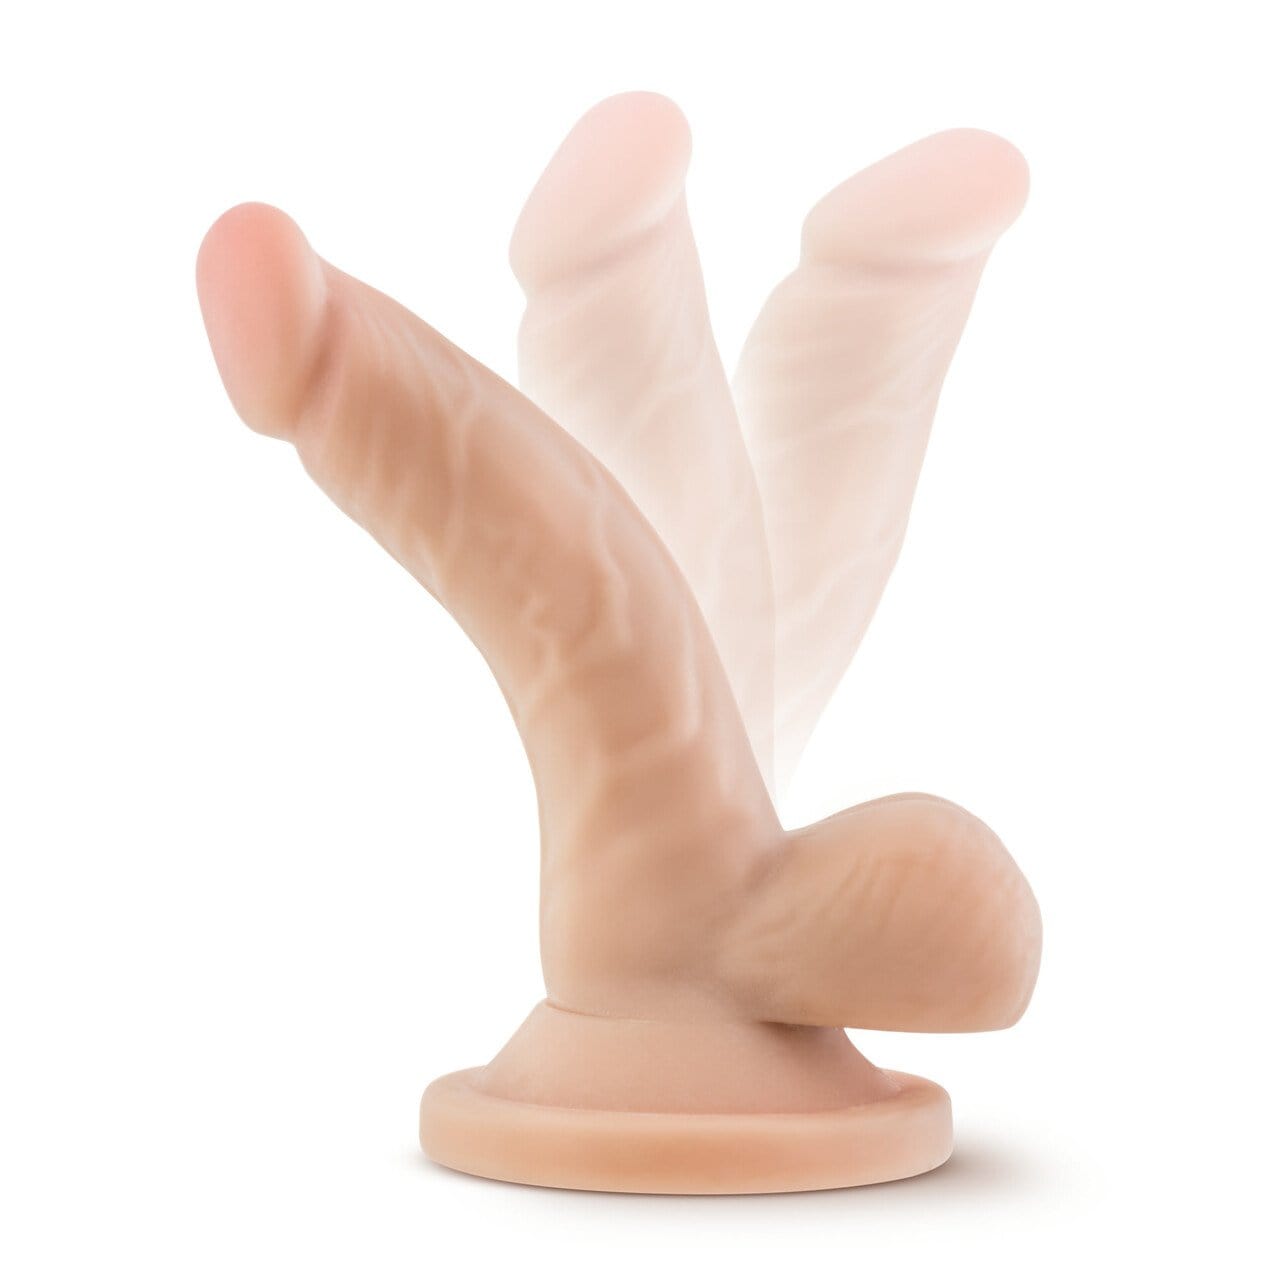 Dr. Skin 4" Mini Cock - Beige - Thorn & Feather Sex Toy Canada